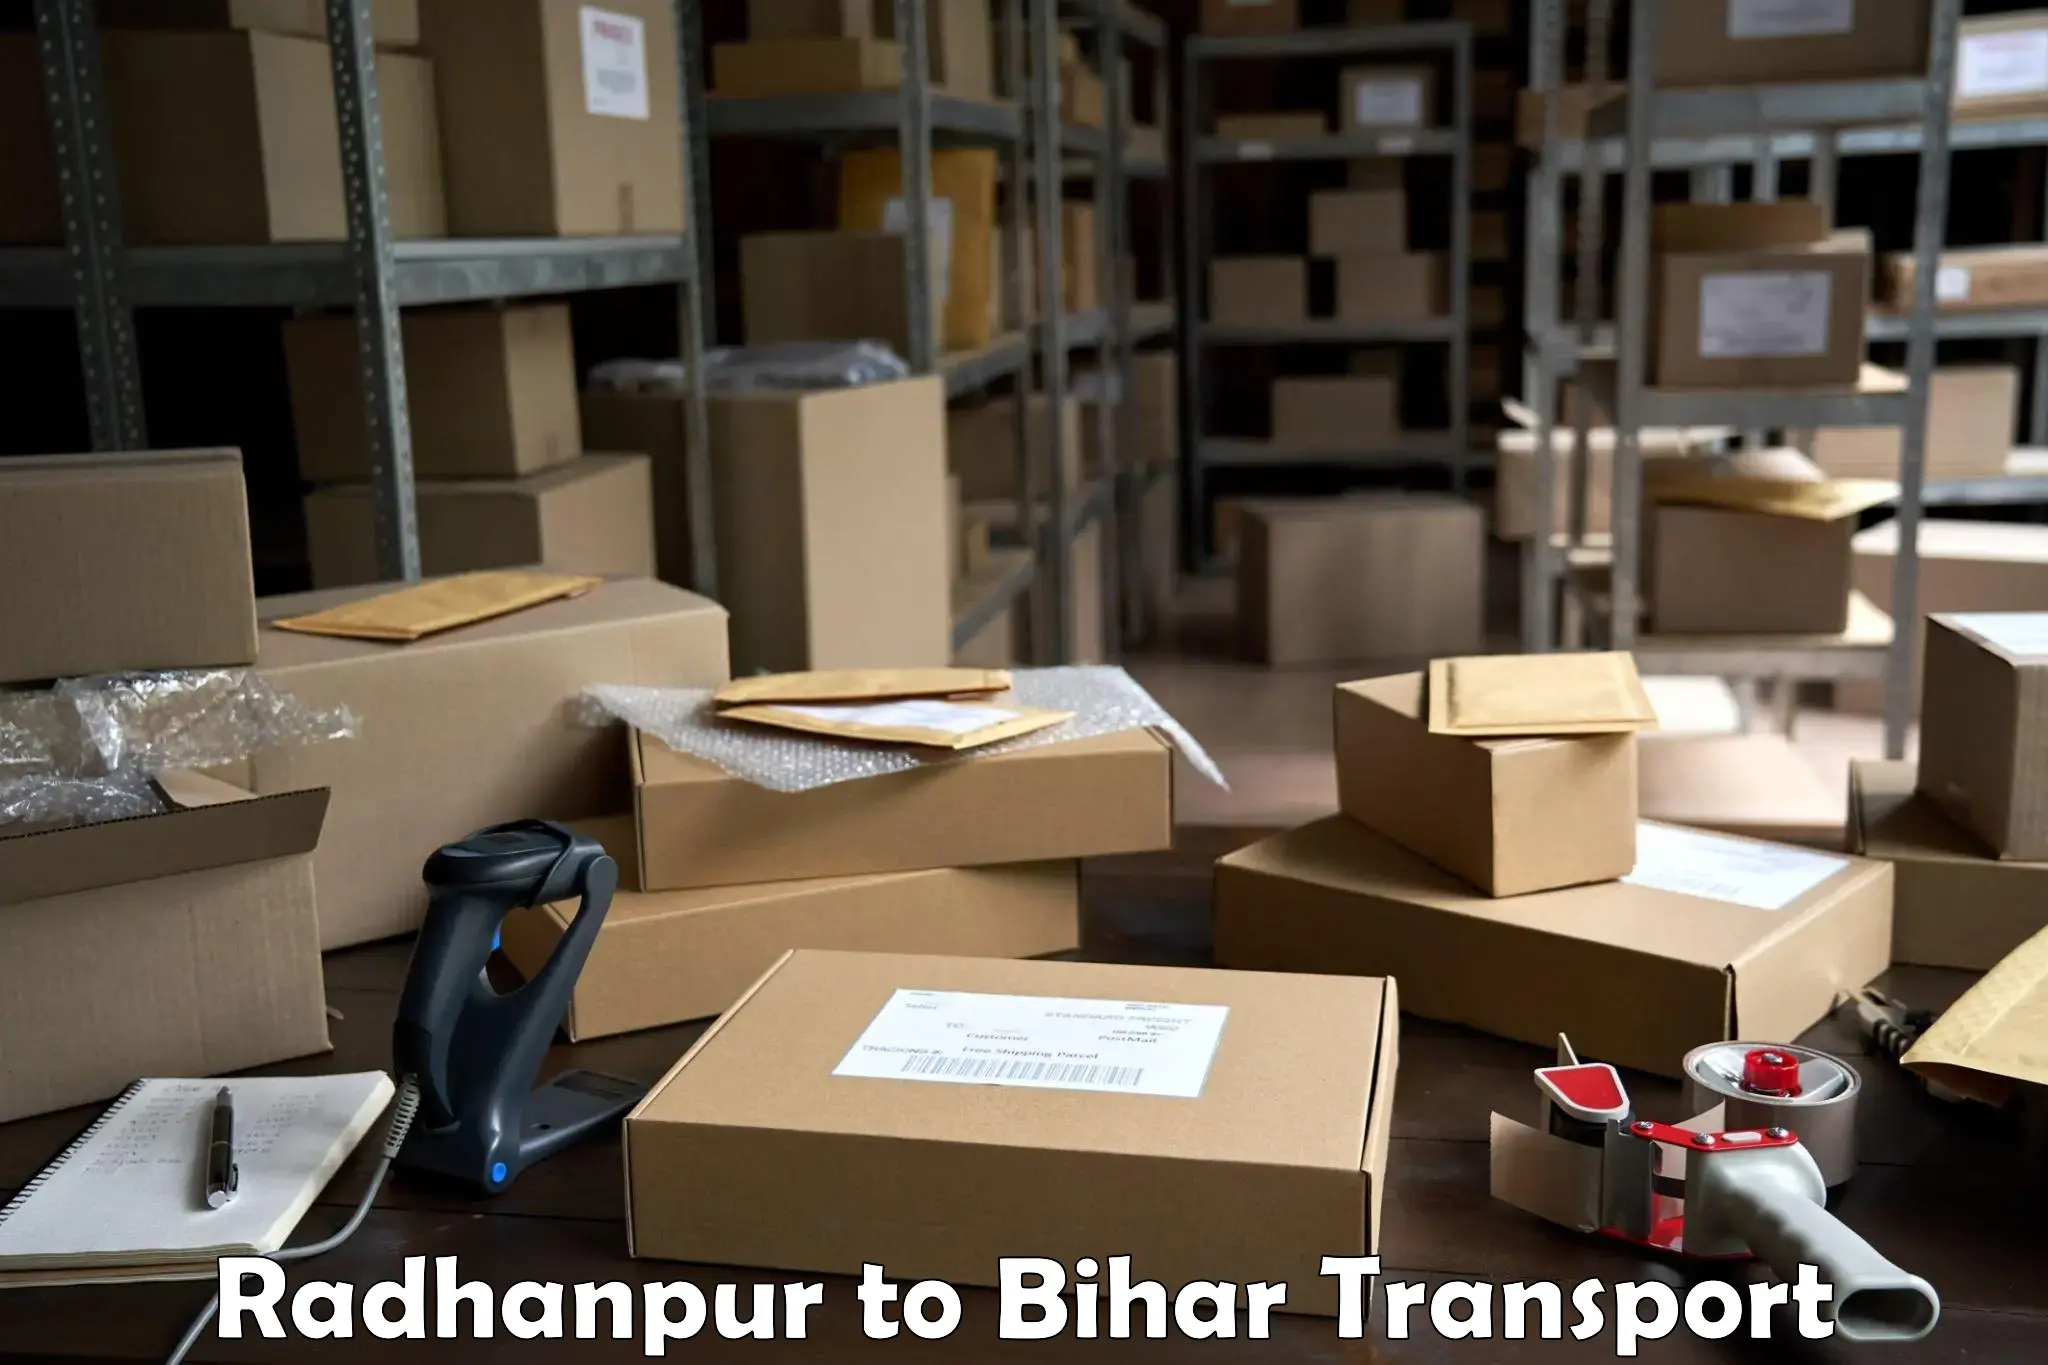 Road transport online services Radhanpur to Bhojpur